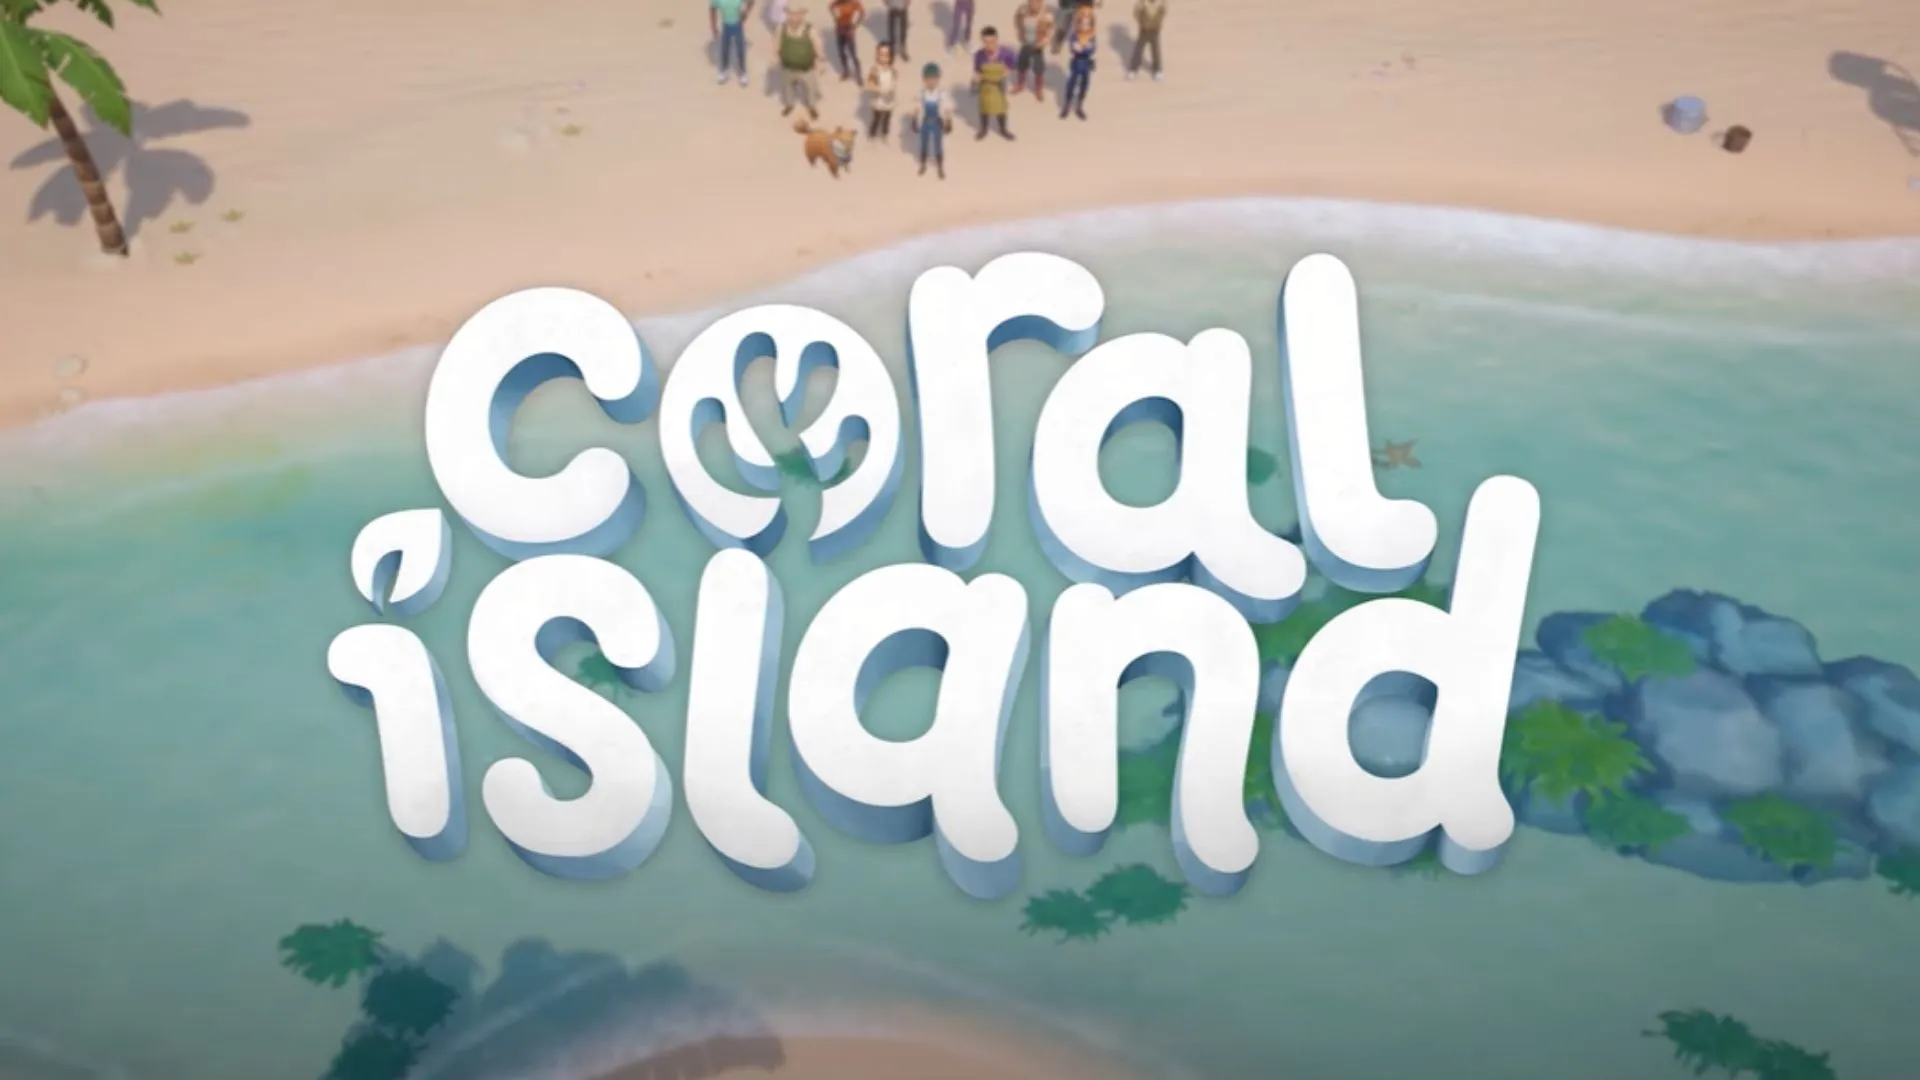 Coral Island Parents Guide